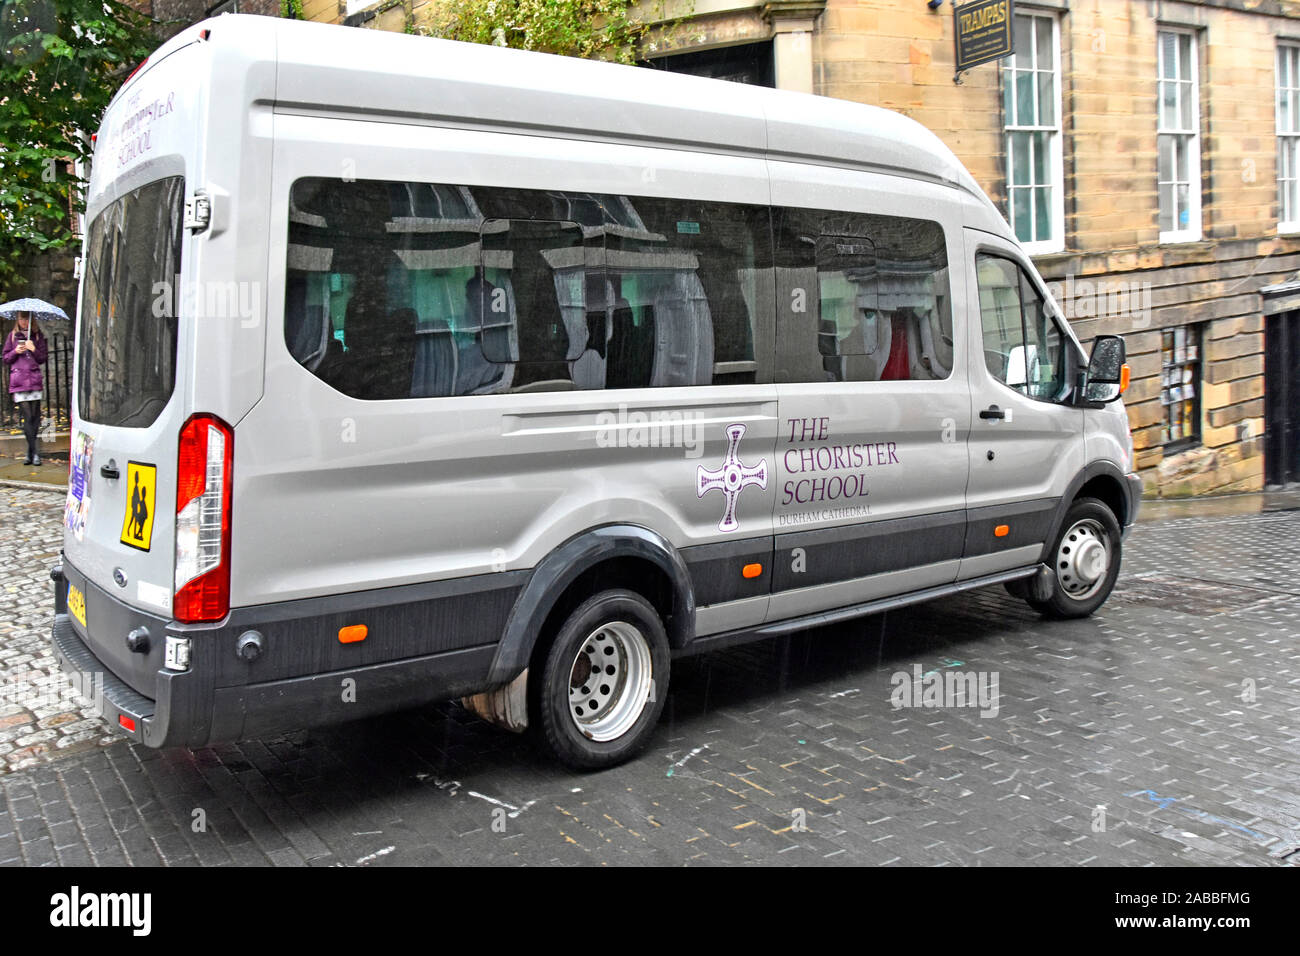 Ford school mini bus vehicle used by The Chorister independent School providing private education & training choristers at Durham Cathedral England UK Stock Photo